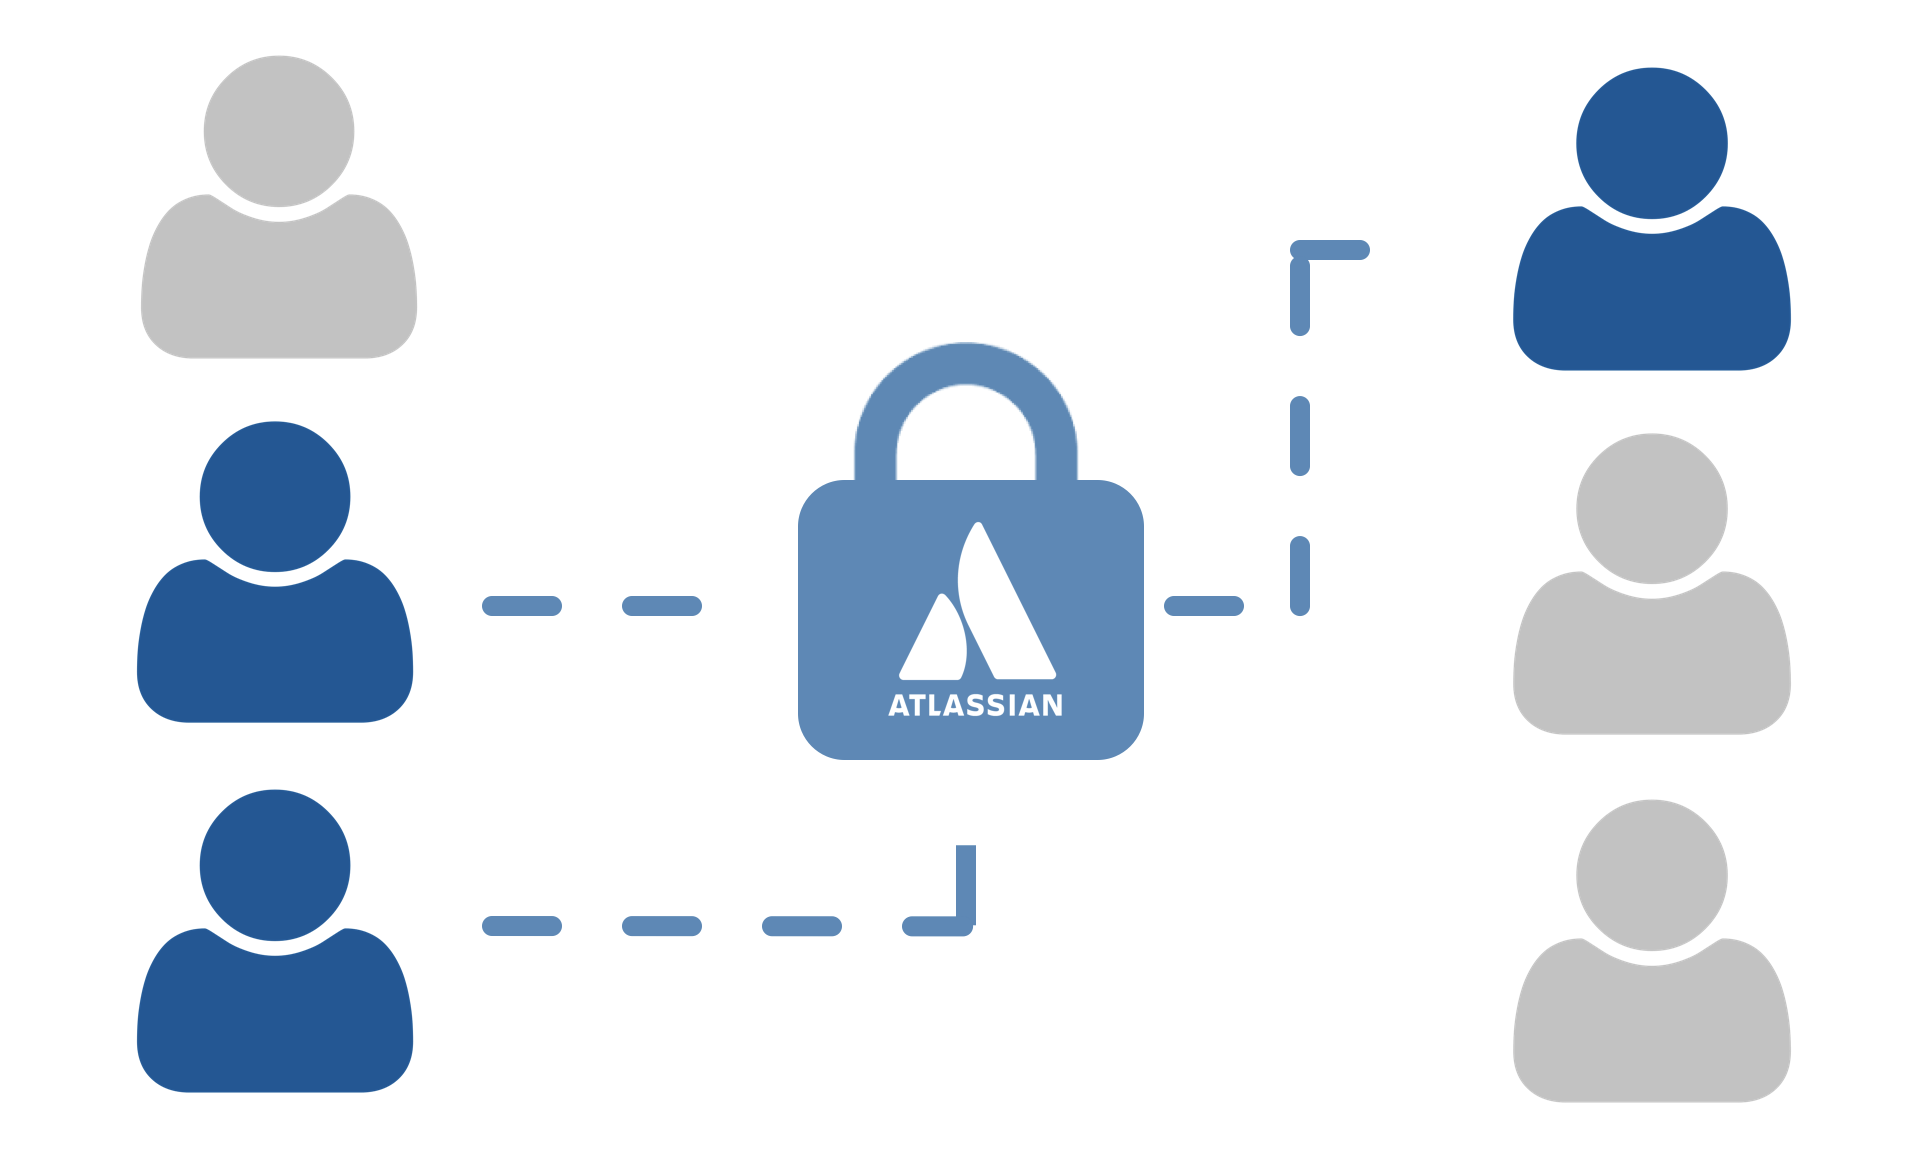 Flat illustration of icons representing people connecting through a lock in the center with the Atlassian logo